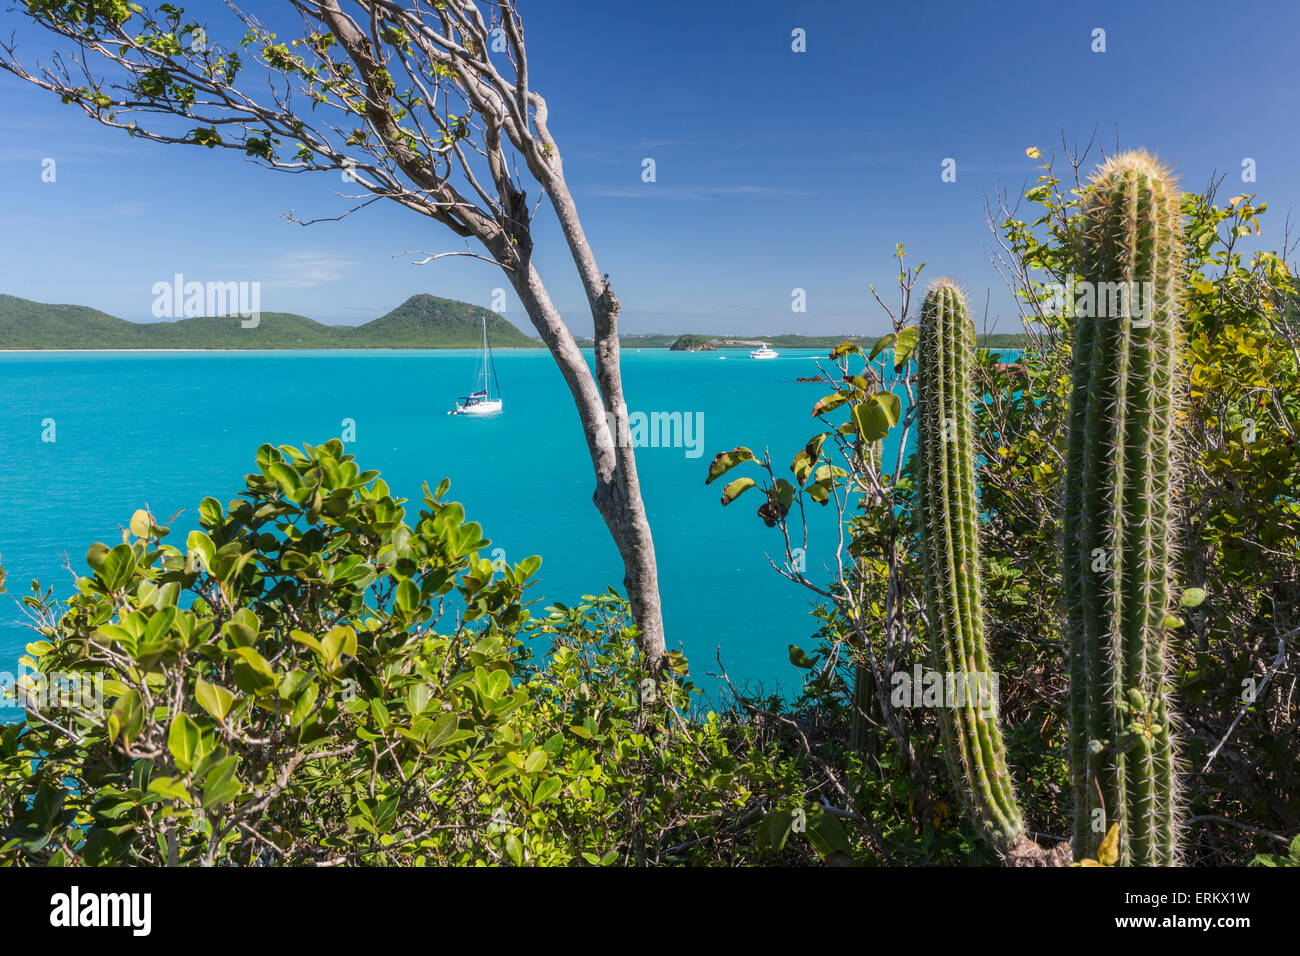 Panoramic view of Spearn Bay from a hill overlooking the quiet lagoon visited by many sailboats, St. Johns, Antigua Stock Photo